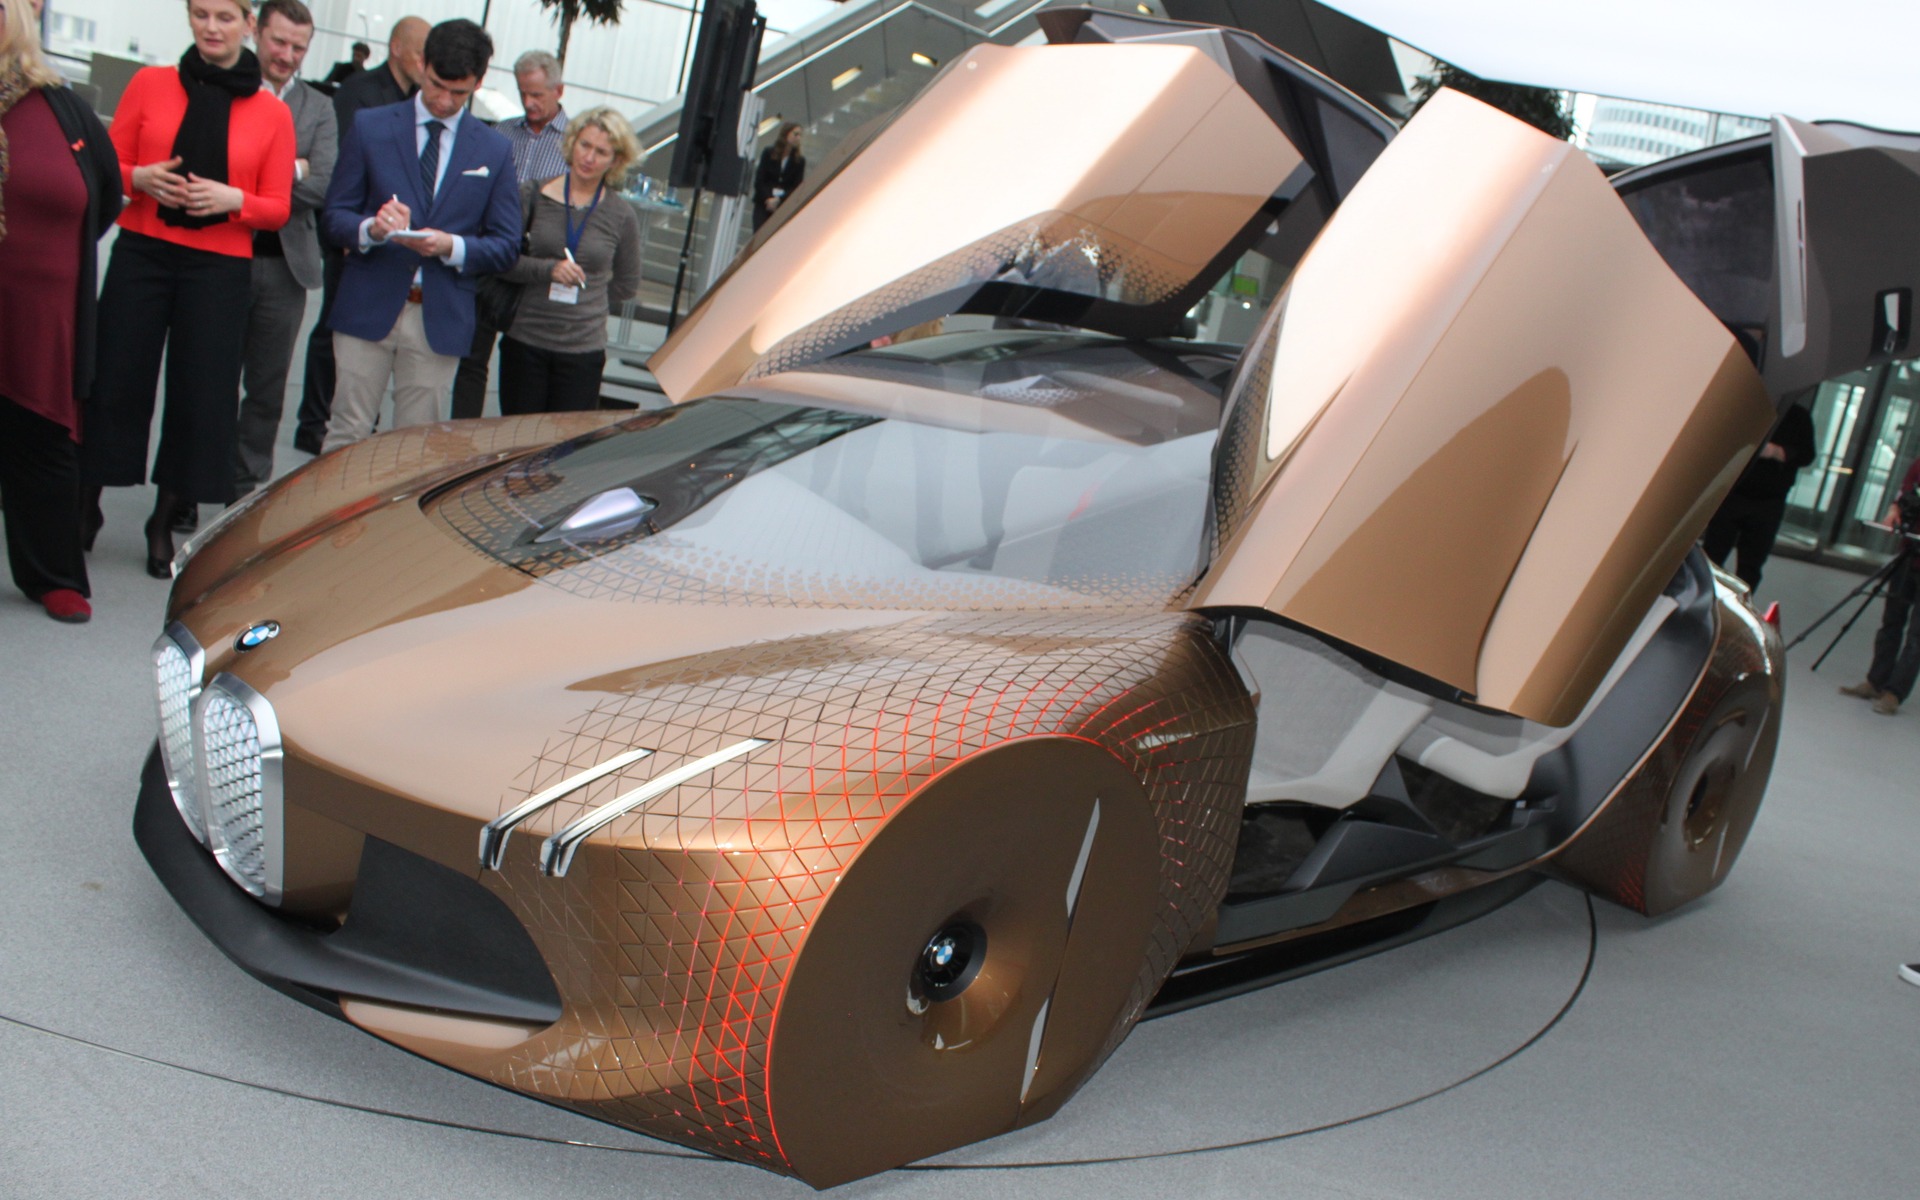 109166 future cars, BMW Vision Next 100, interior - Rare Gallery HD  Wallpapers